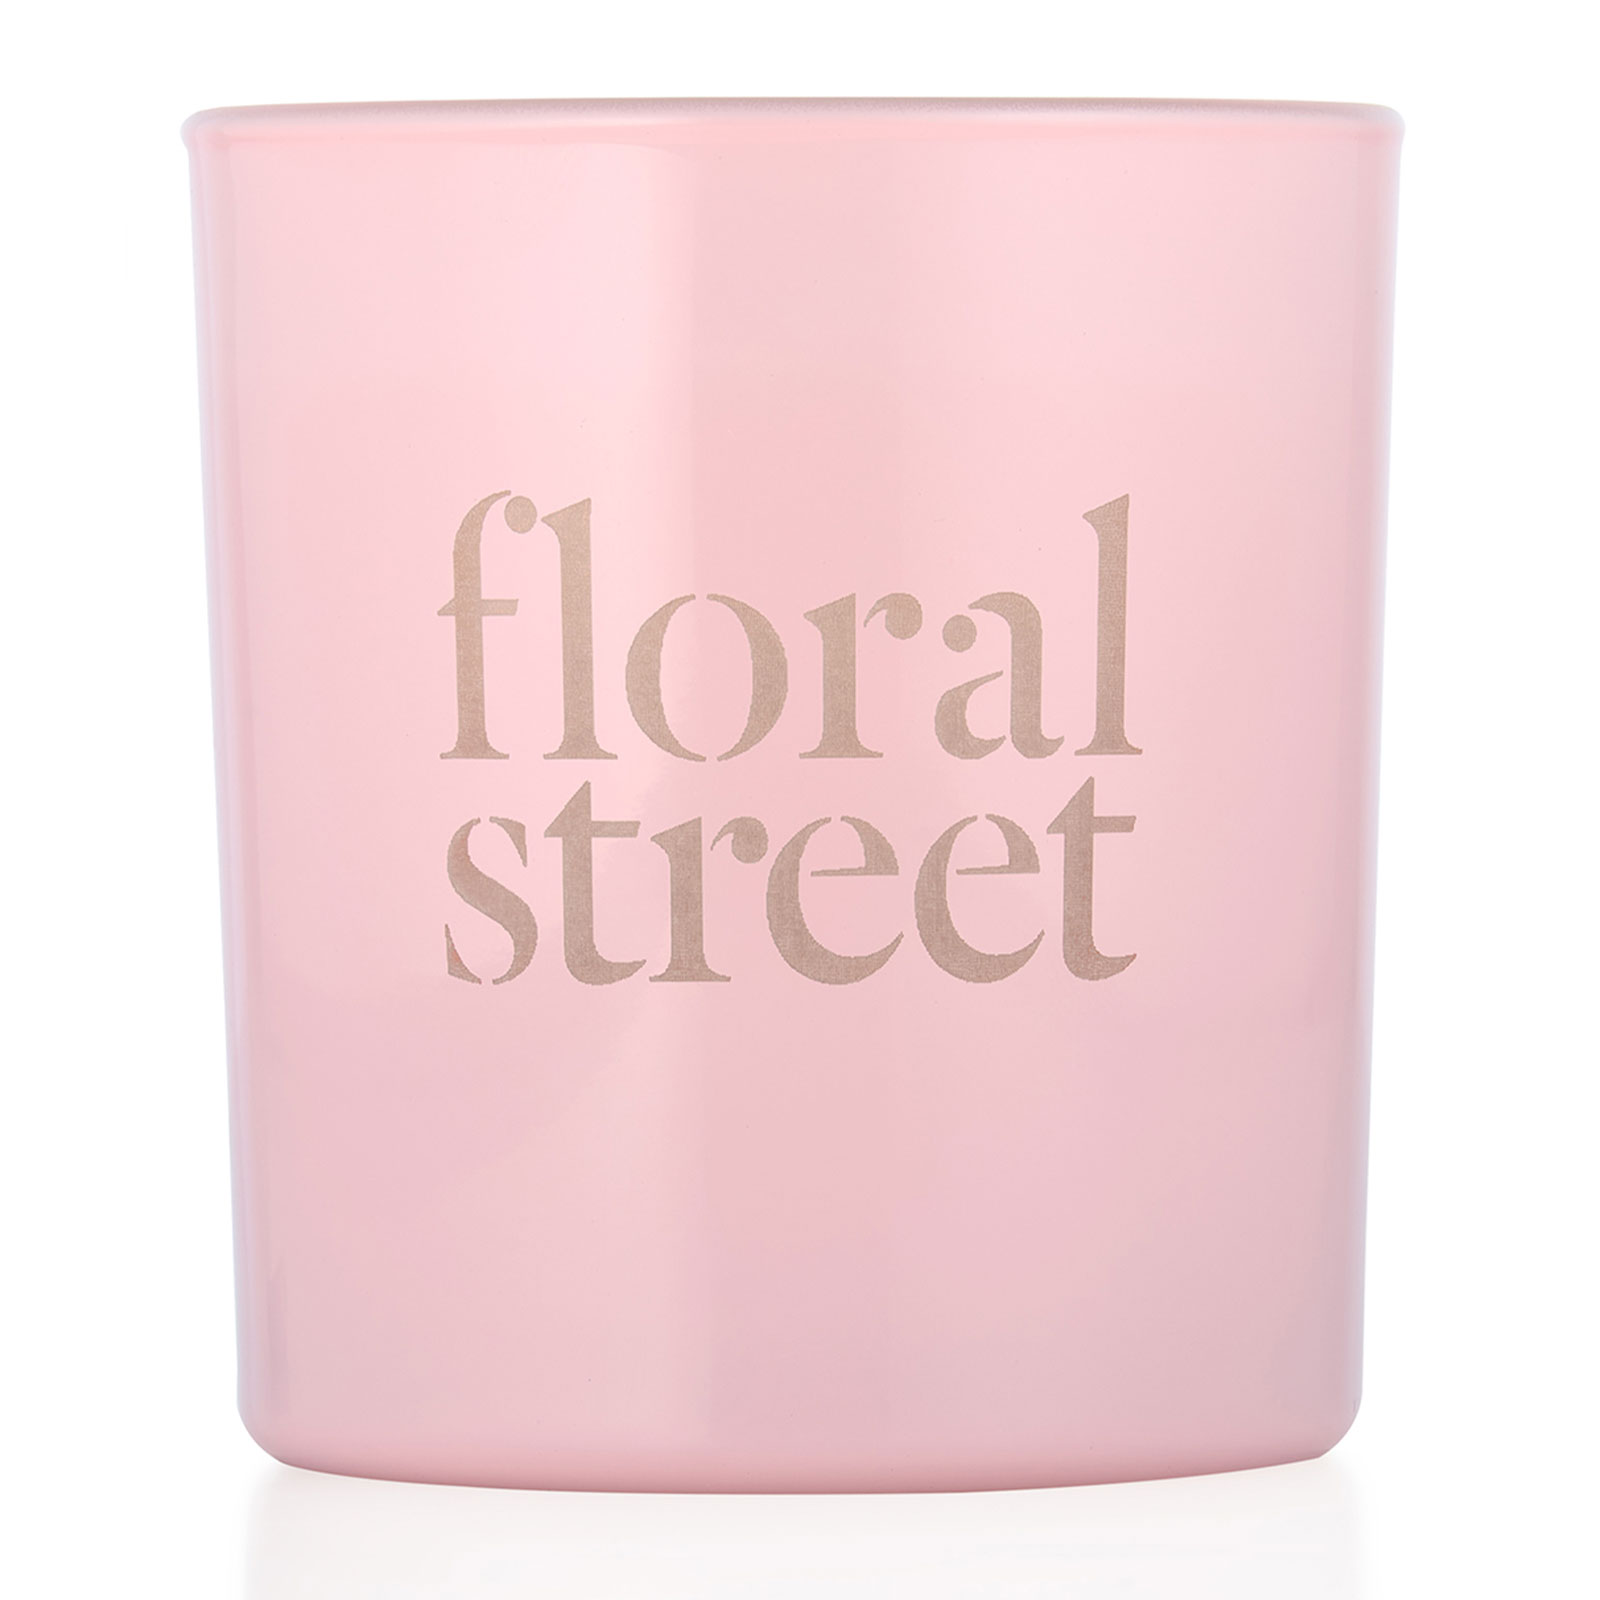 Floral Street Lady Emma Candle 200G